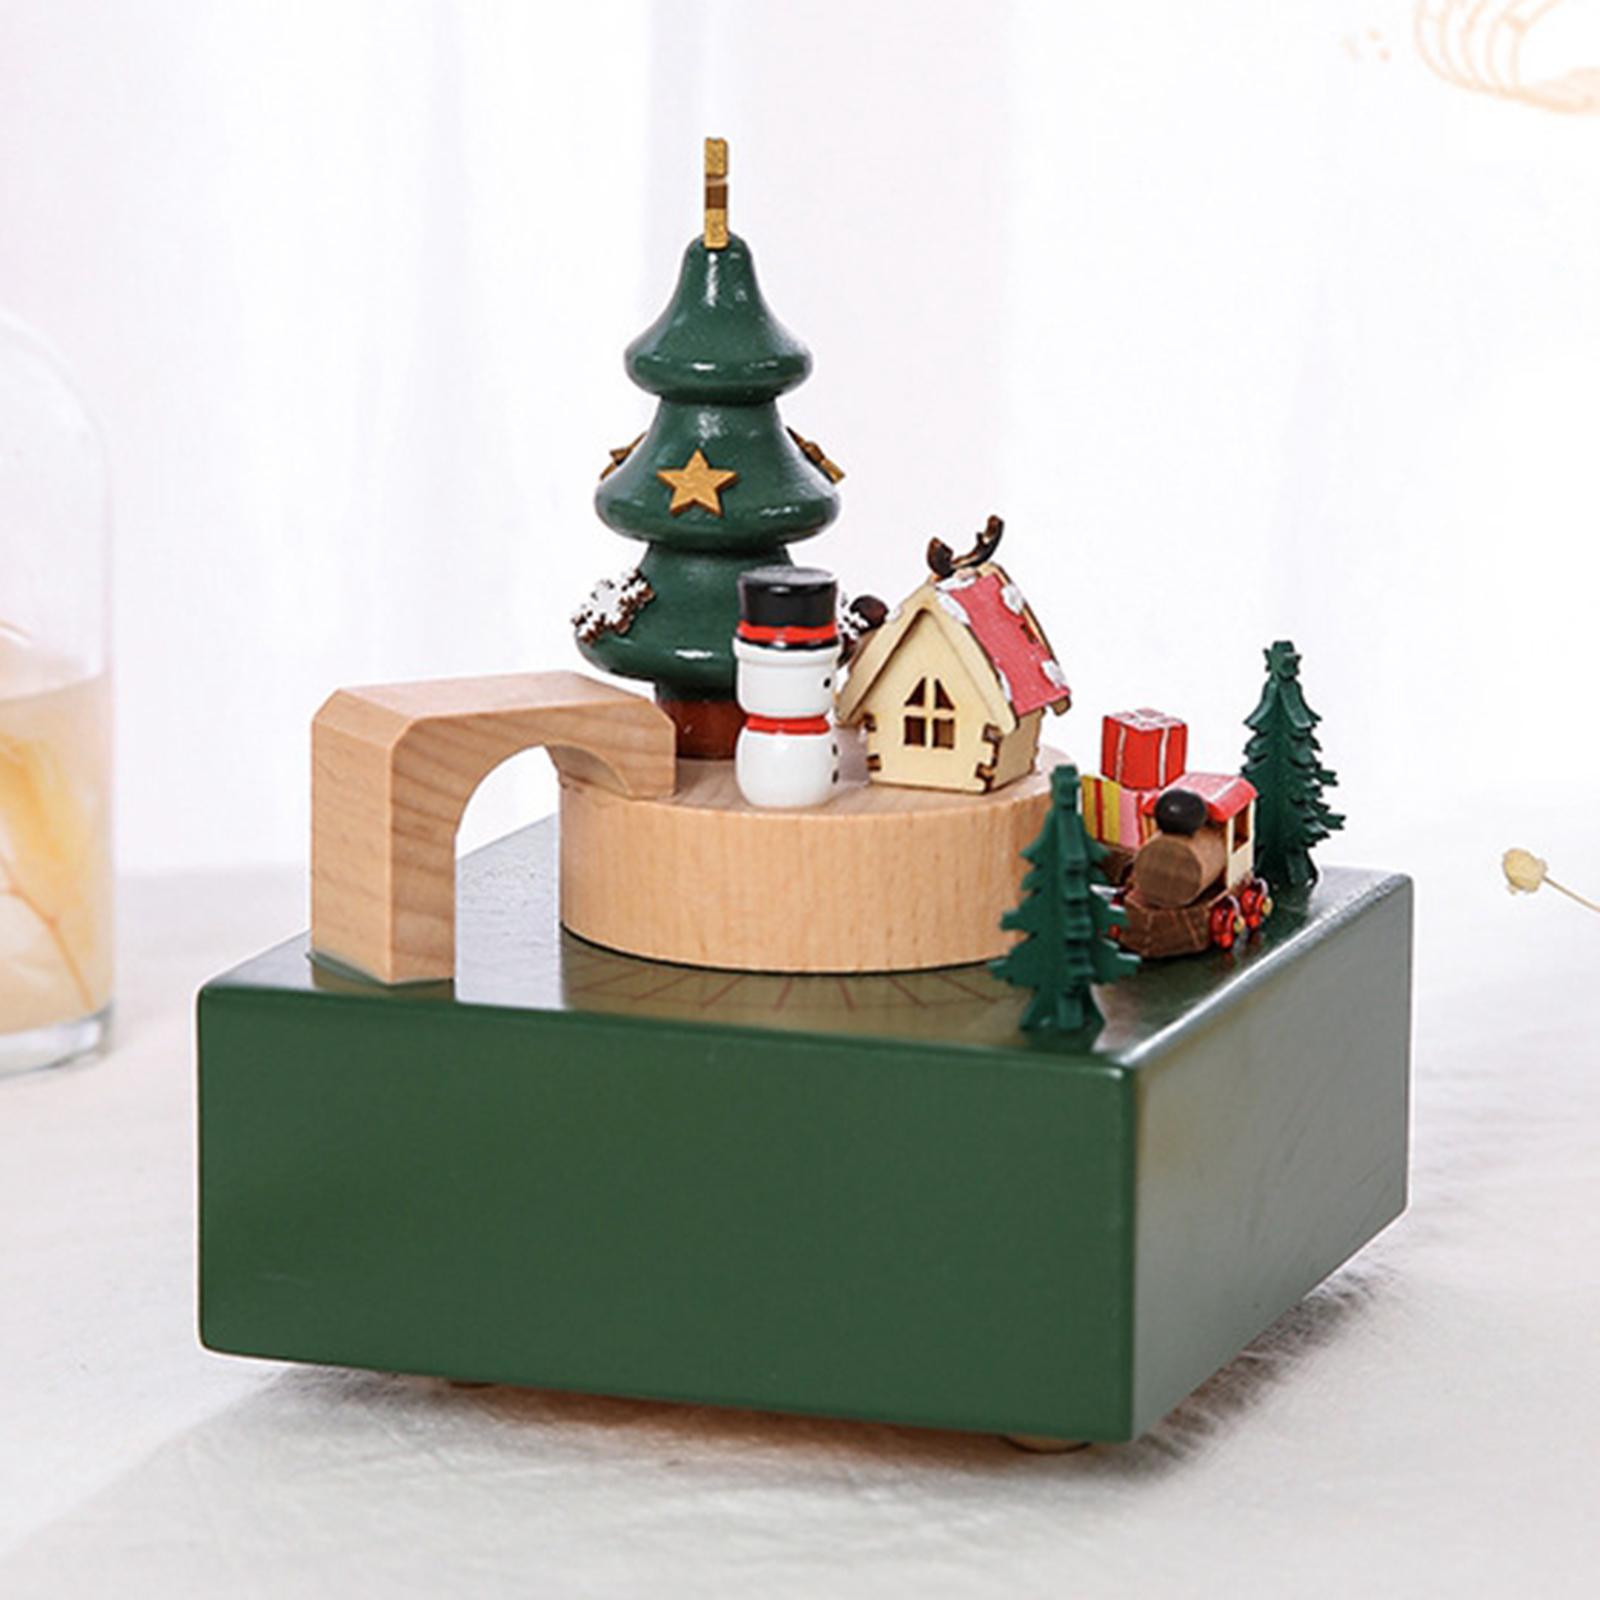 Portable Music Box Collectible with Songs Craft Ornament Decorative Christmas Ornament Rotating for Birthday Present Bookshelf Holiday Table